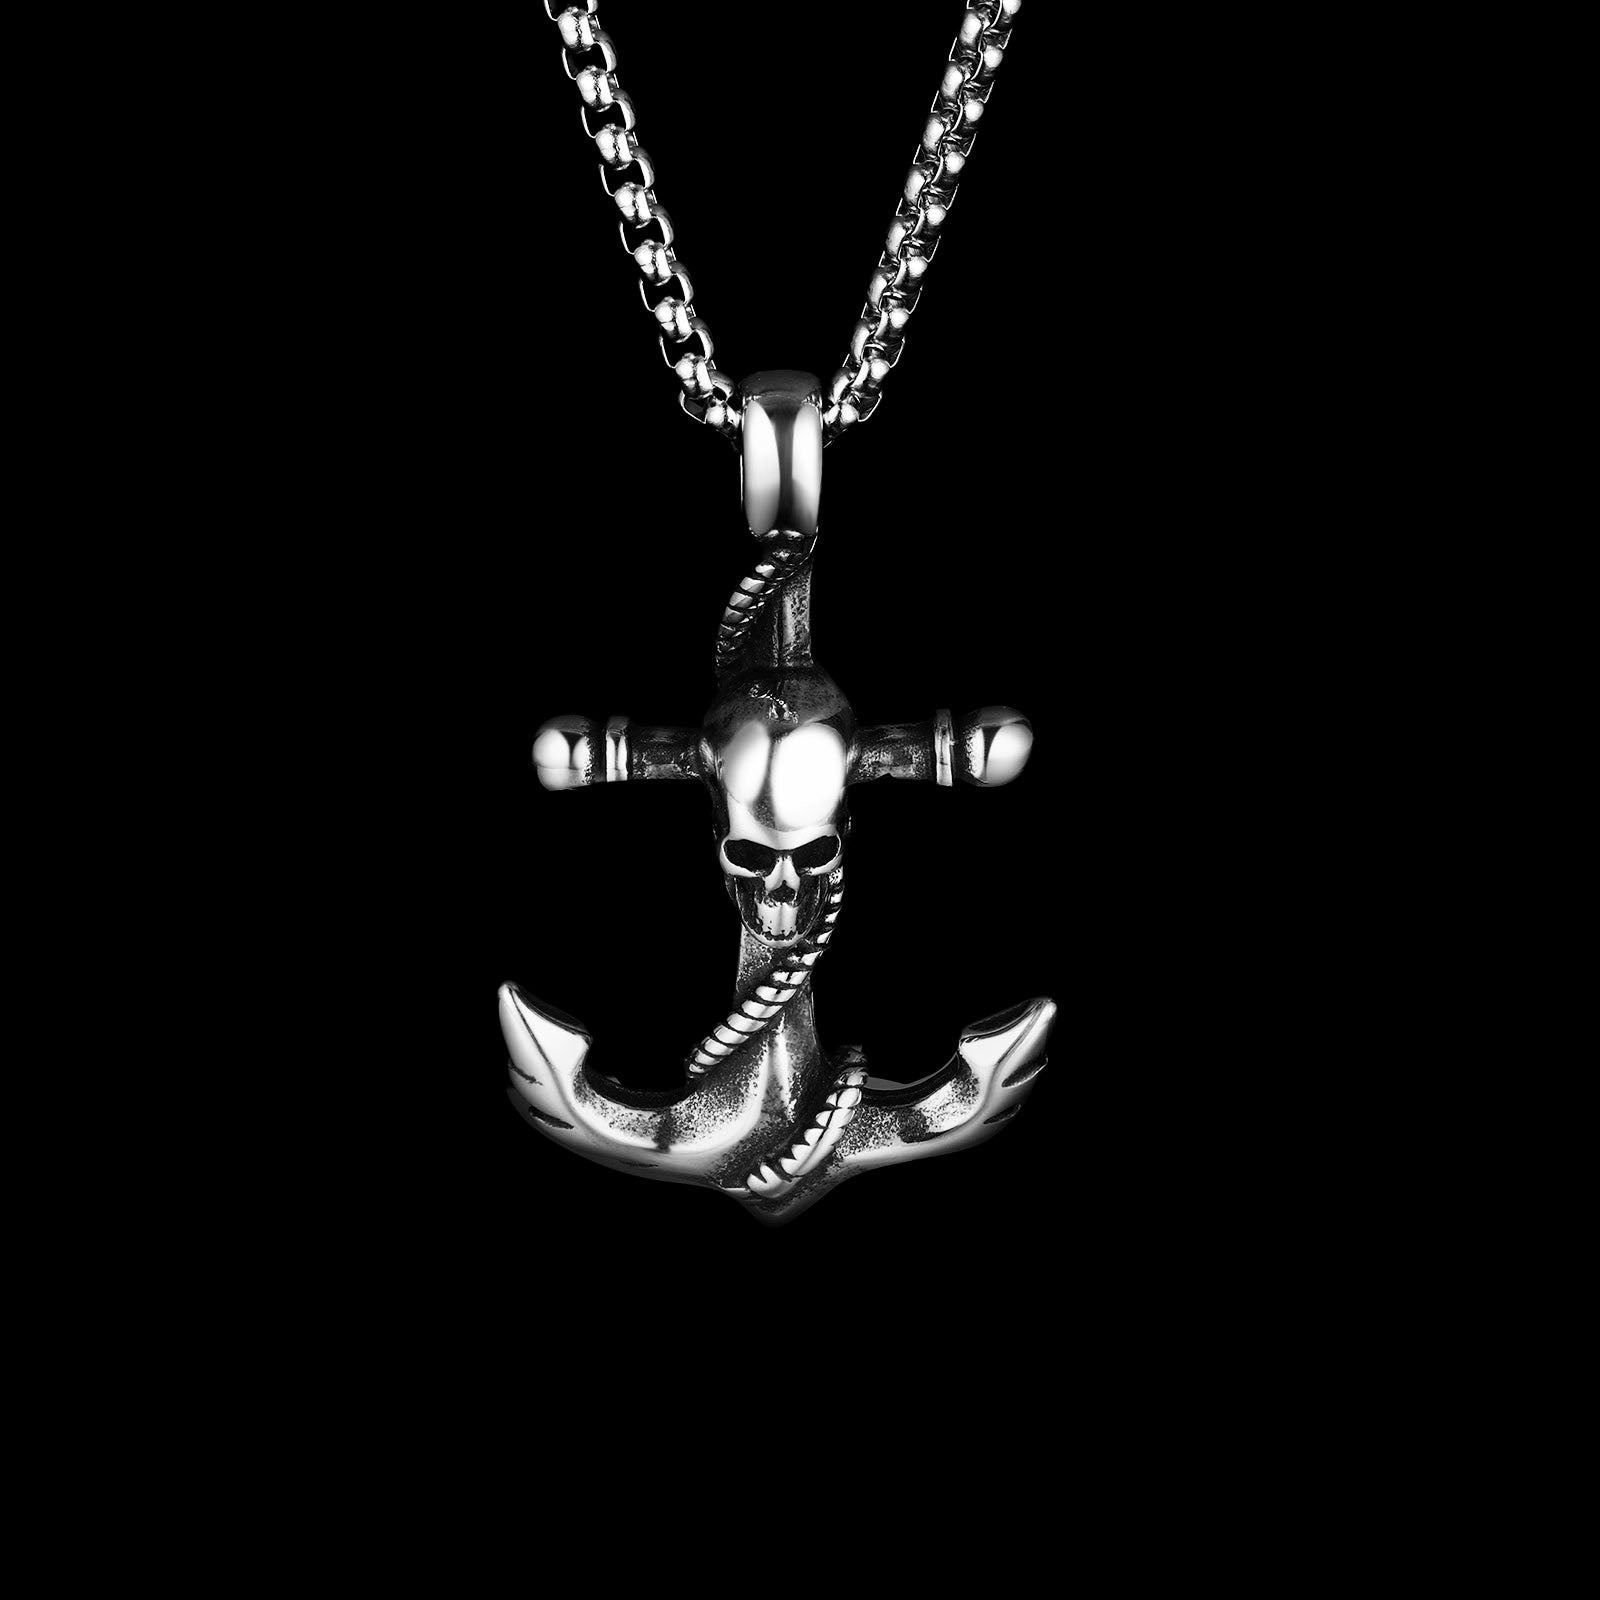 SKULLED ANCHOR. - NECKLACE